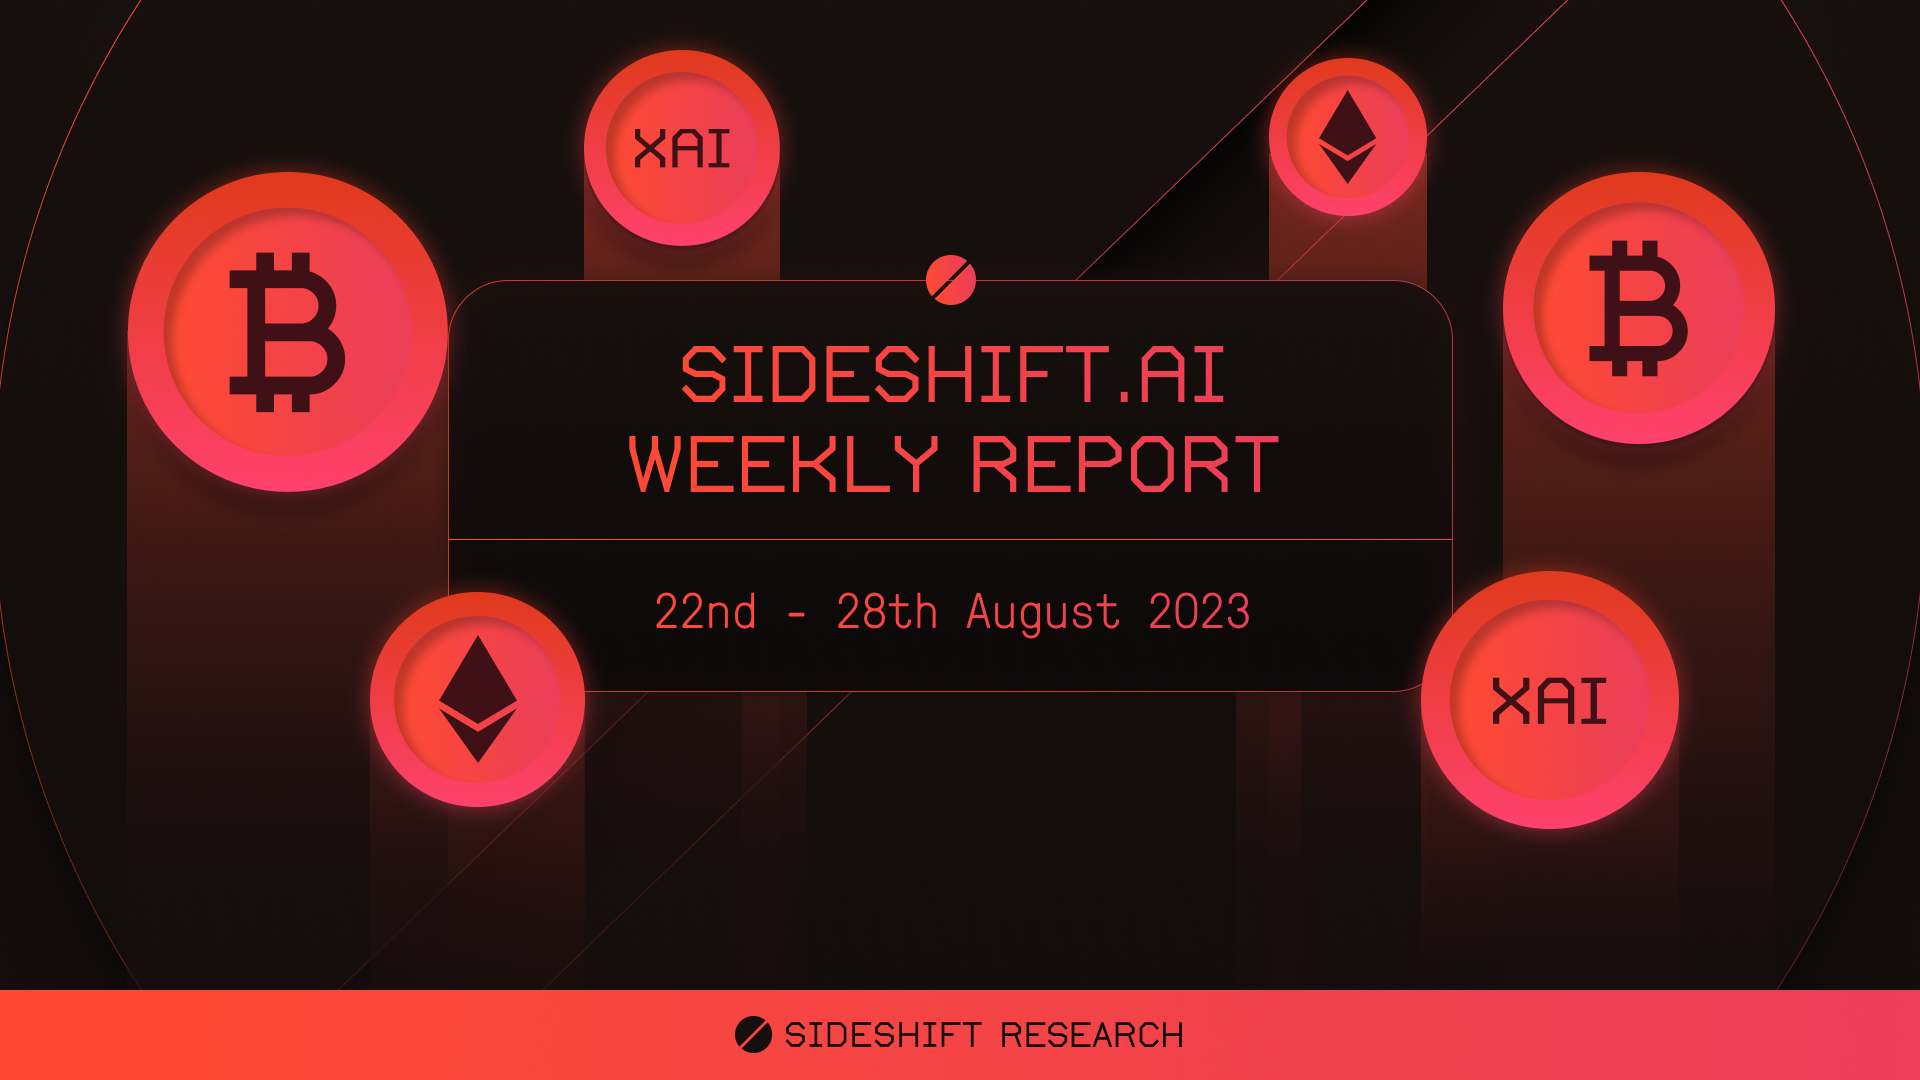 SideShift.ai Weekly Report | 22nd - 28th August 2023